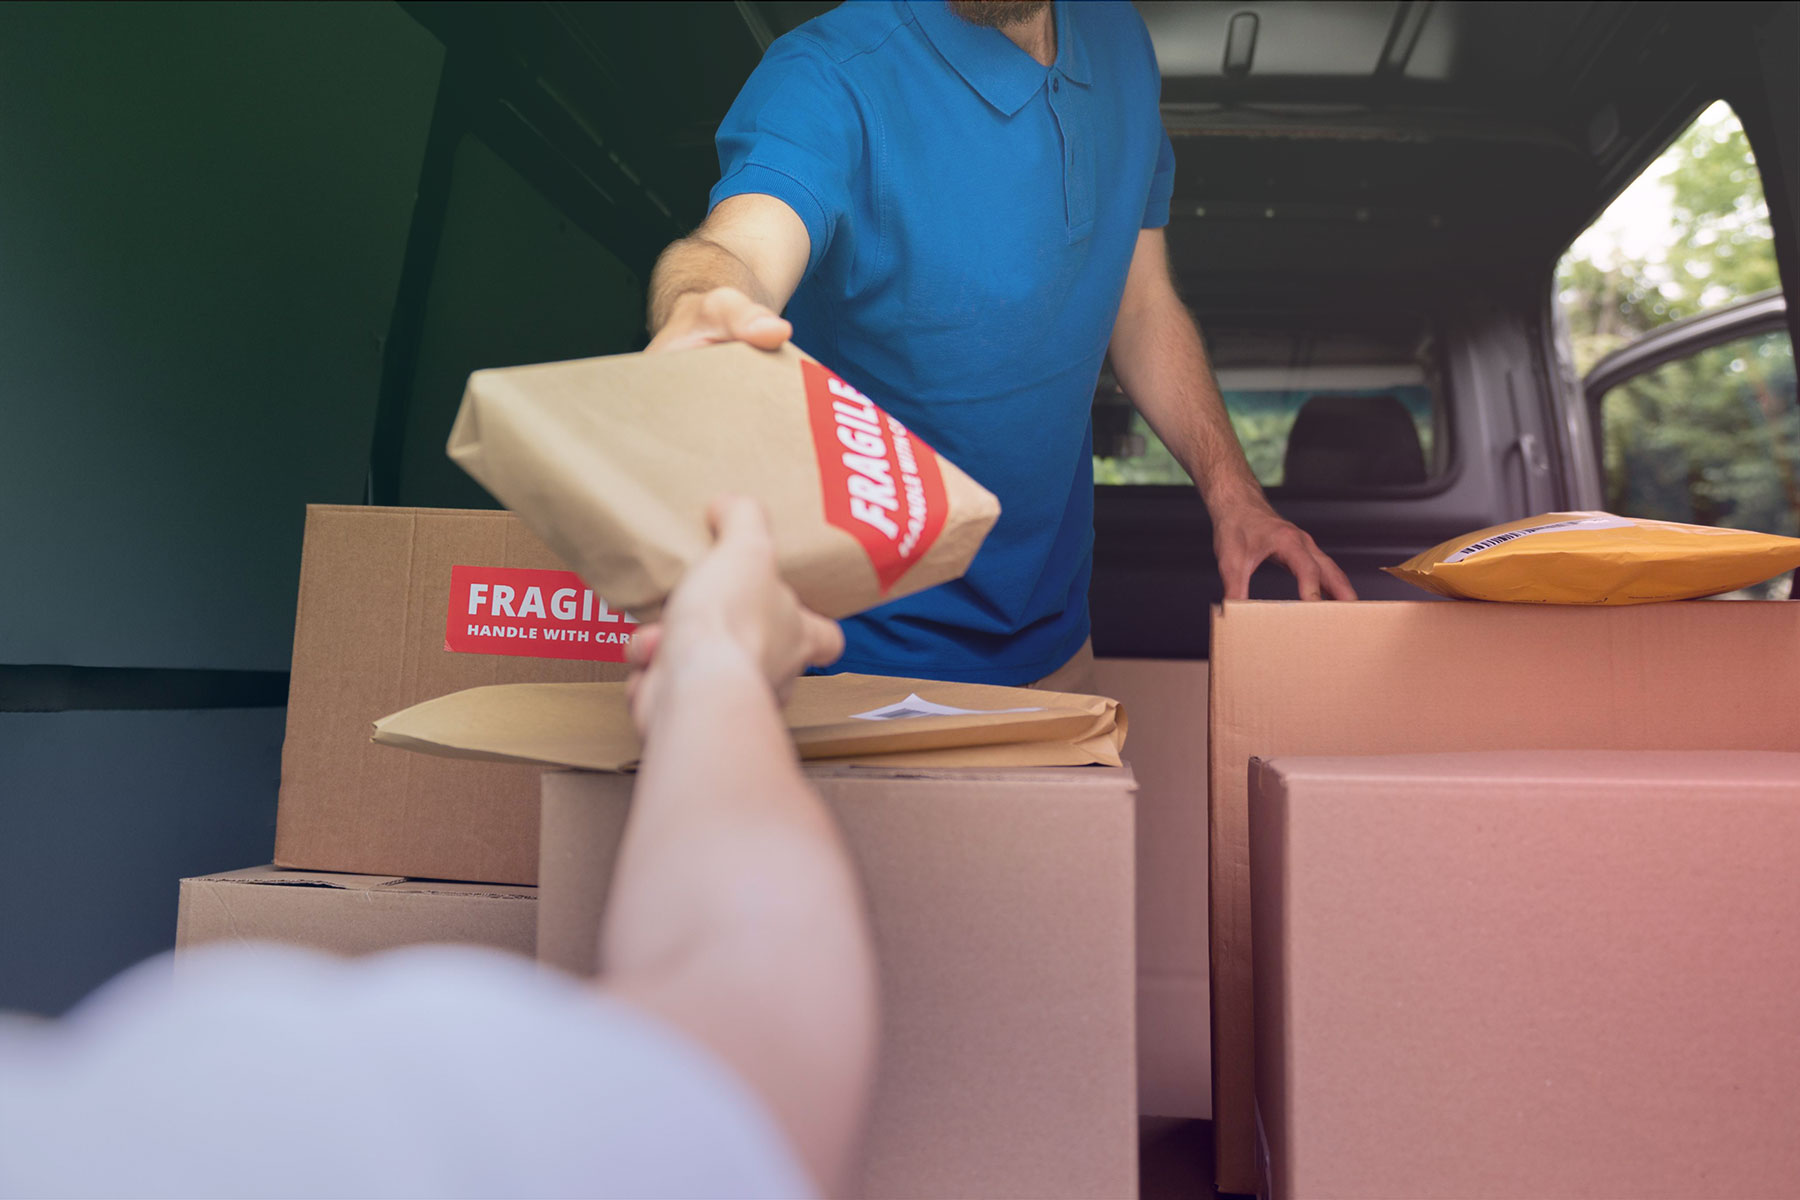 What are the benefits of last mile delivery?